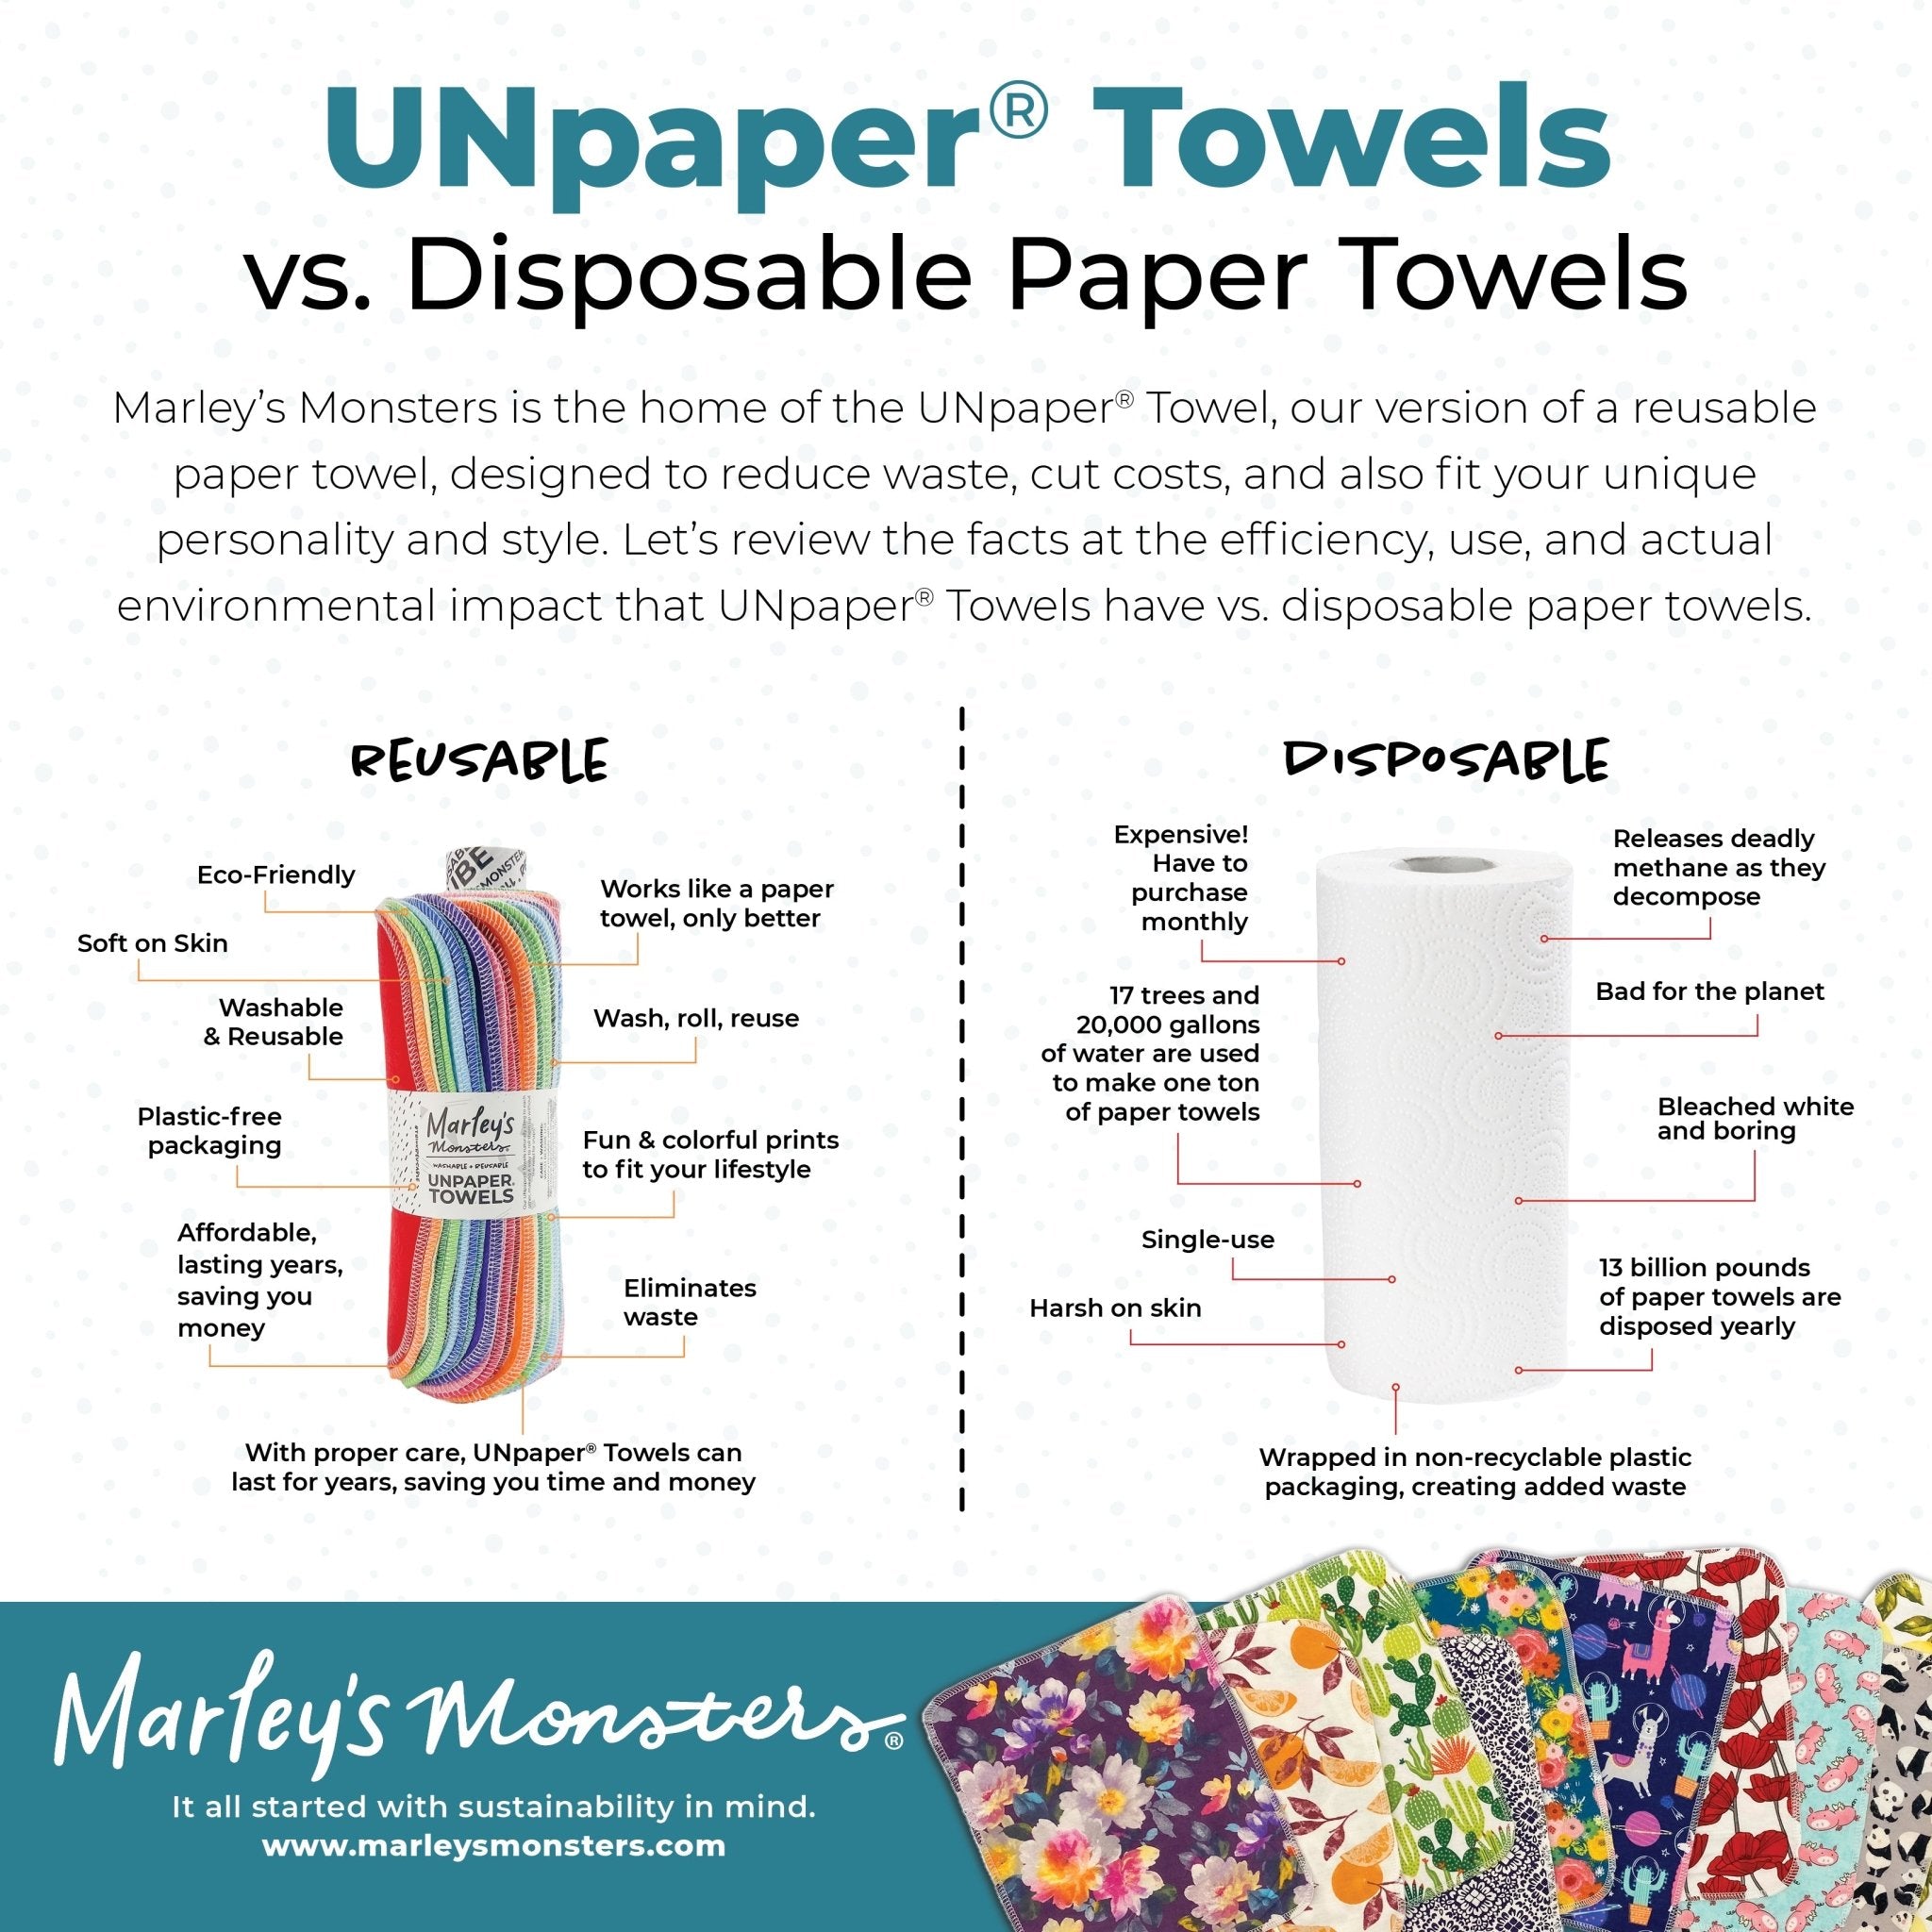 How to Reduce the Carbon Footprint of Your Paper Towels?